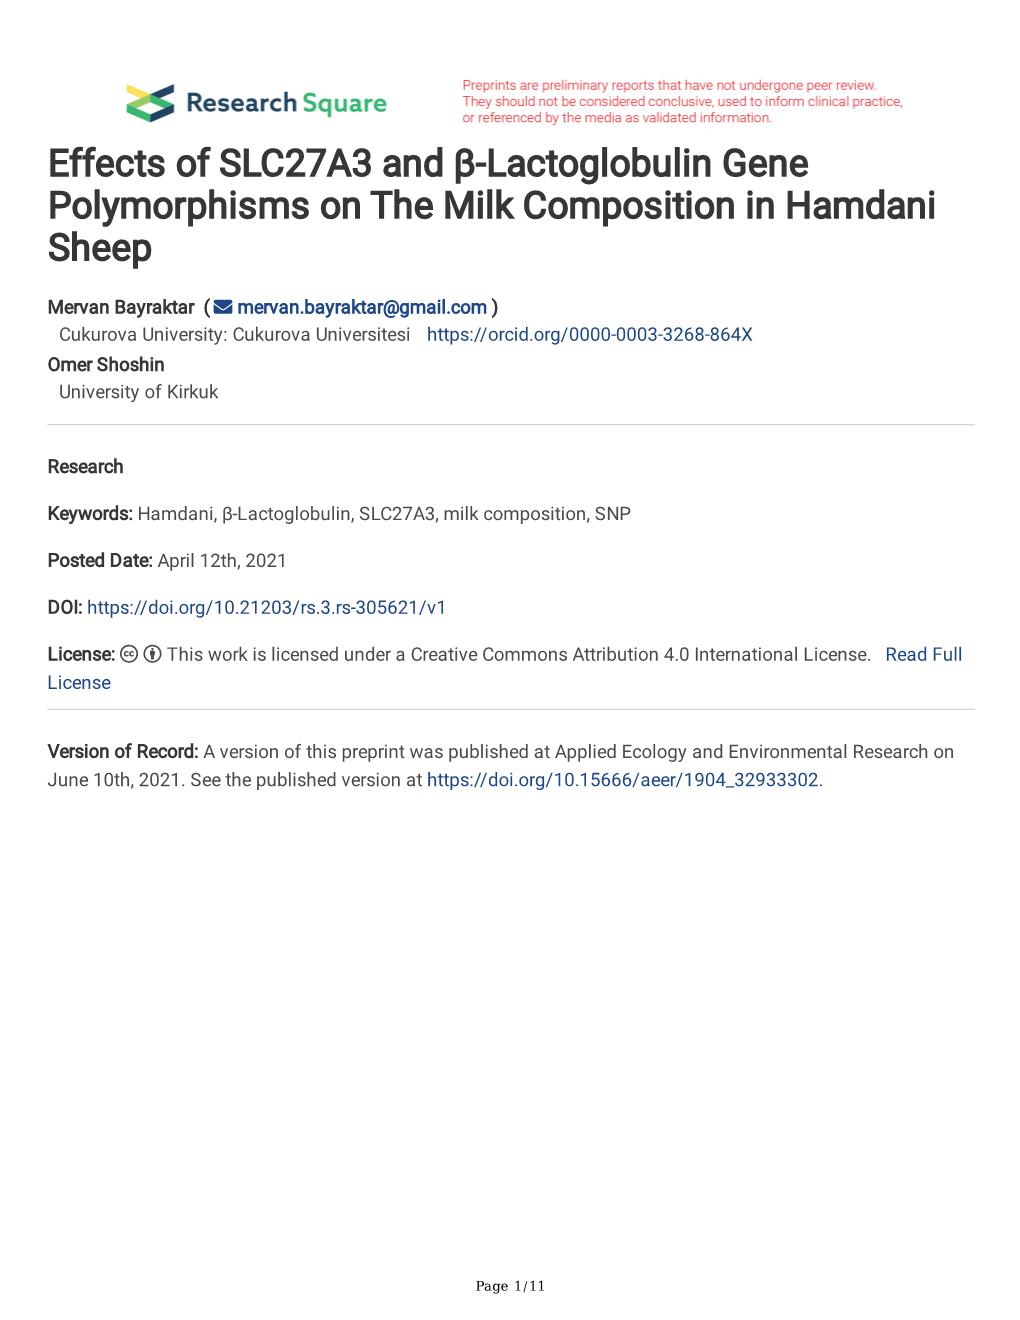 Effects of SLC27A3 and Β-Lactoglobulin Gene Polymorphisms on the Milk Composition in Hamdani Sheep